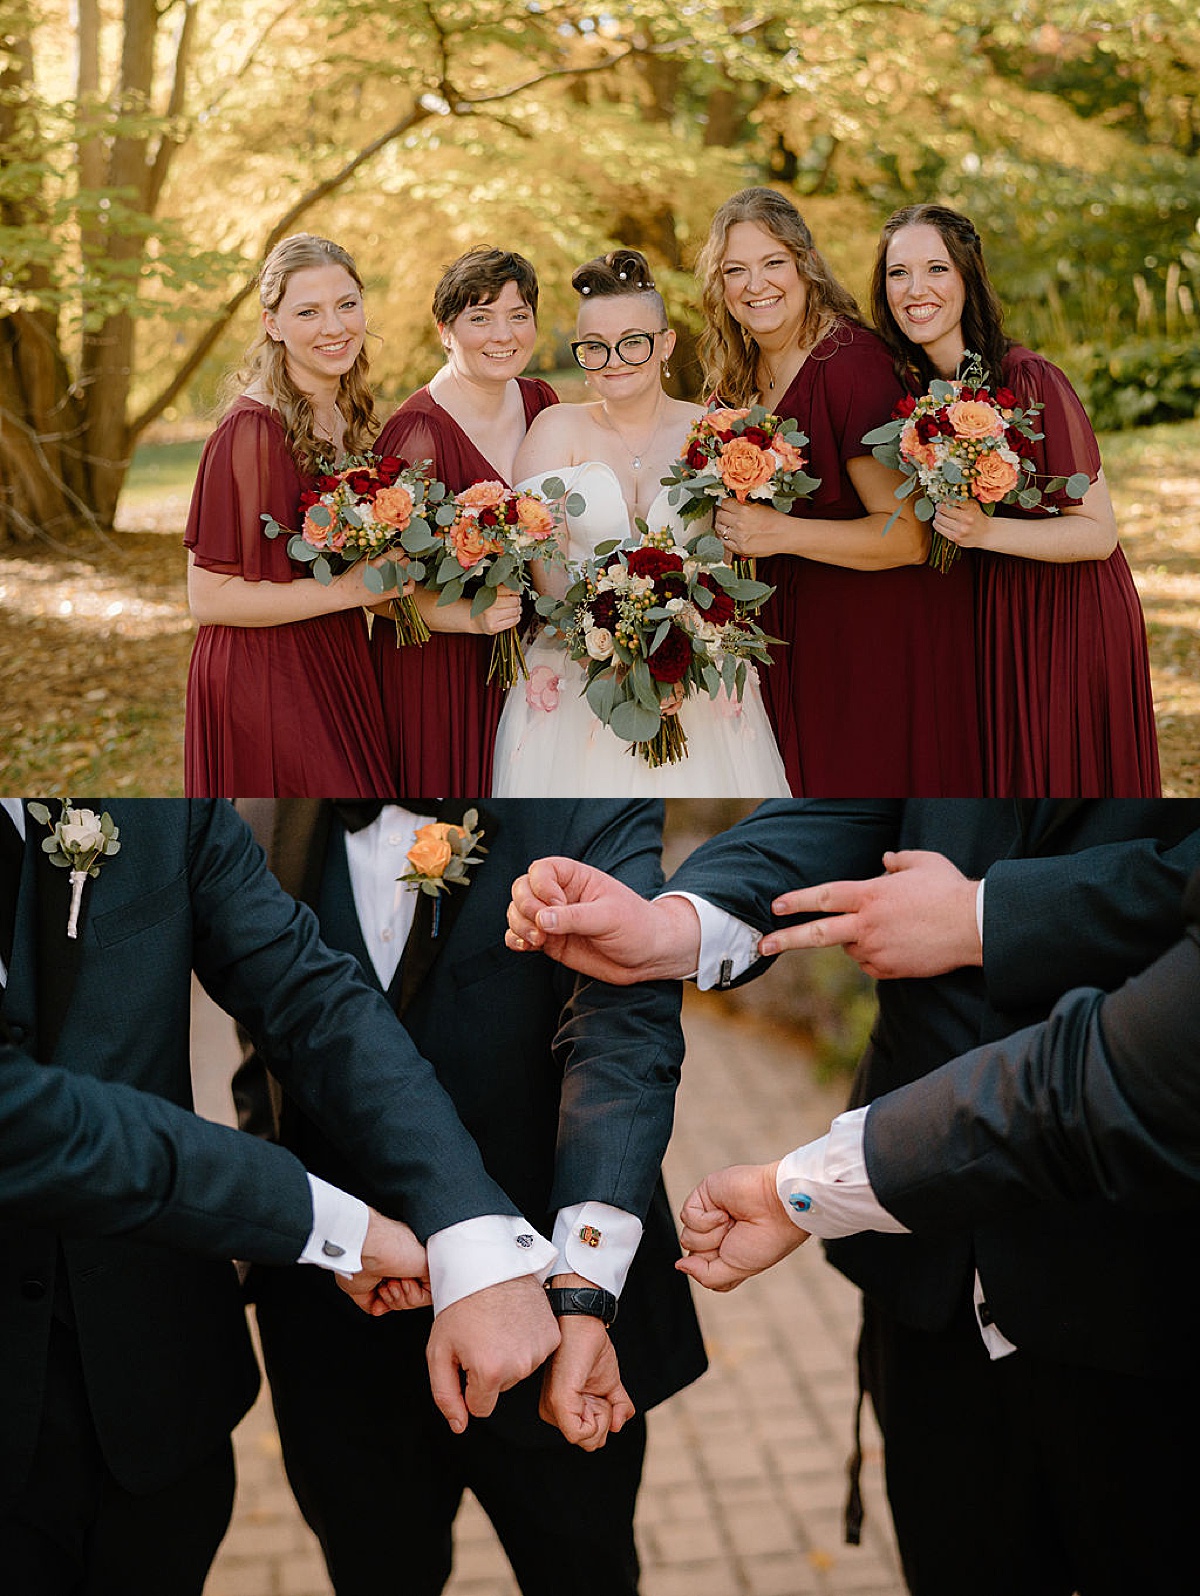 wedding party in burgundy dresses and midnight blue suits pose with the bride and groom before fall wedding shot by Indigo Lace Collective